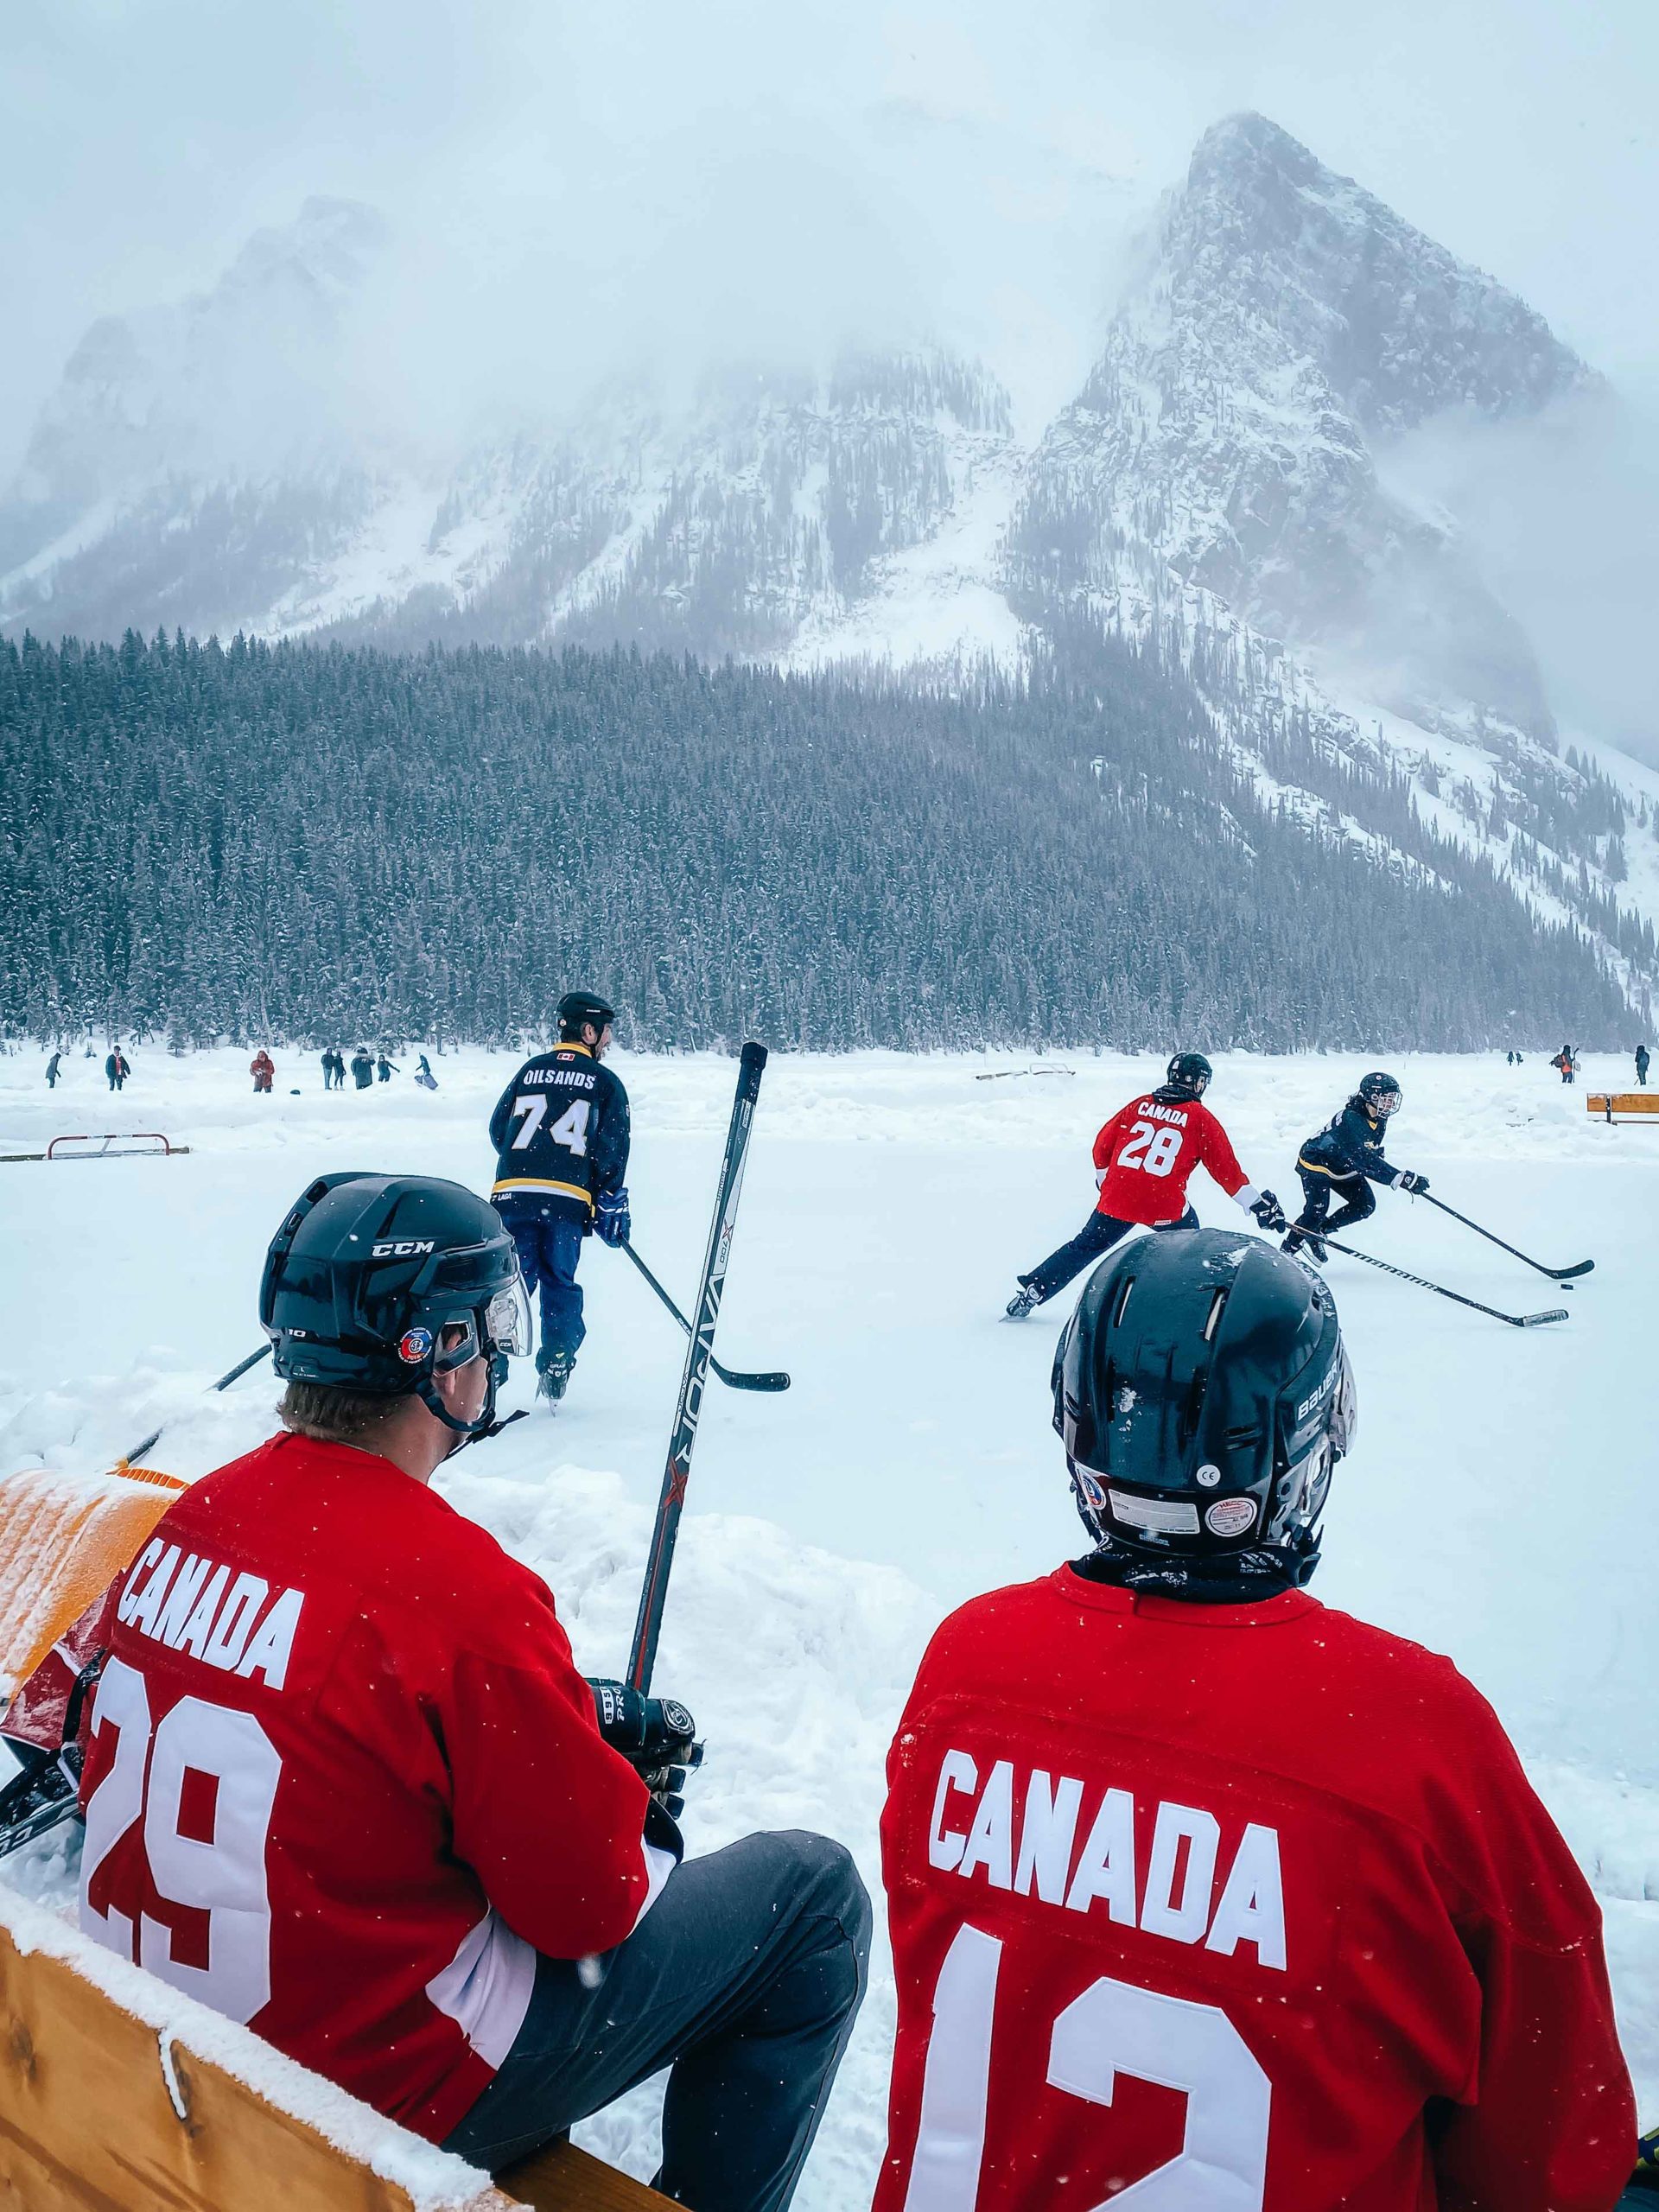 Using a foreground, like the hockey players in this photo, is one of the great photography tips for your phone by Sanjay Chauhan 